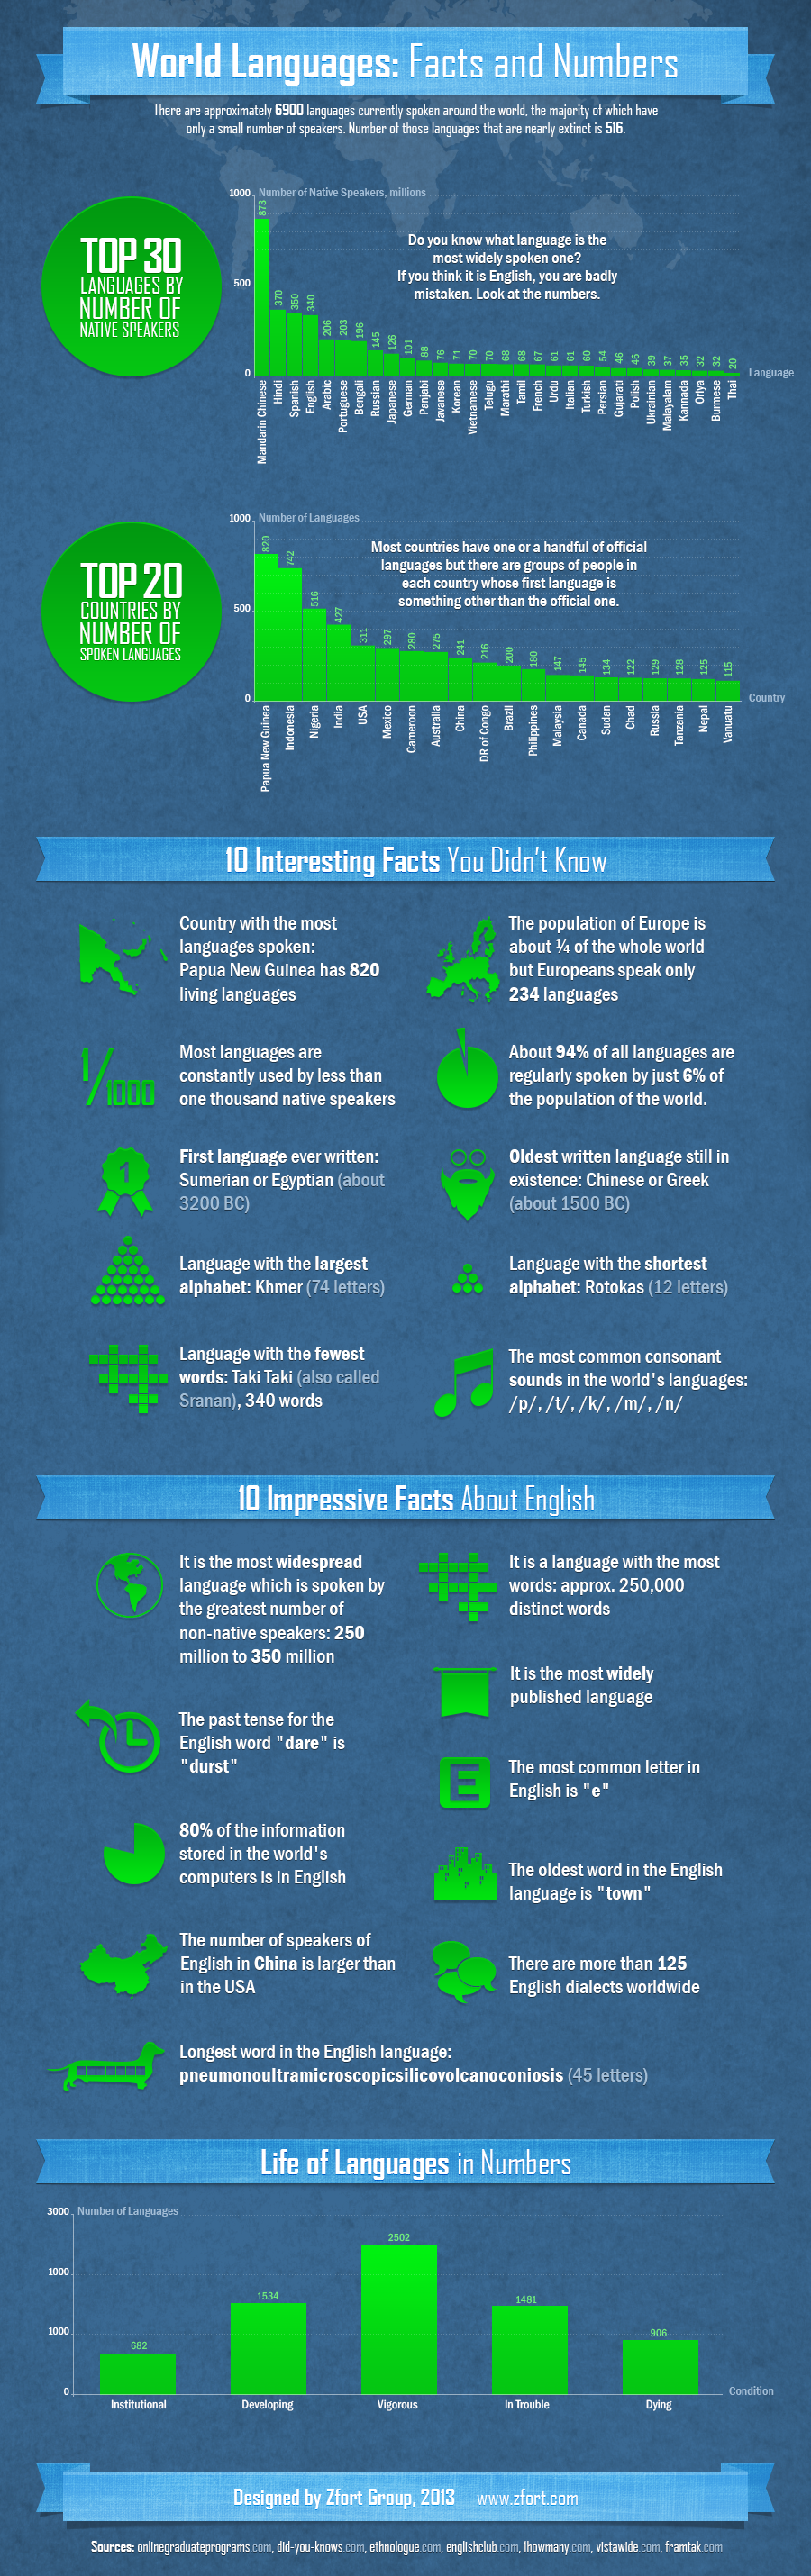 World Languages: Facts and Numbers